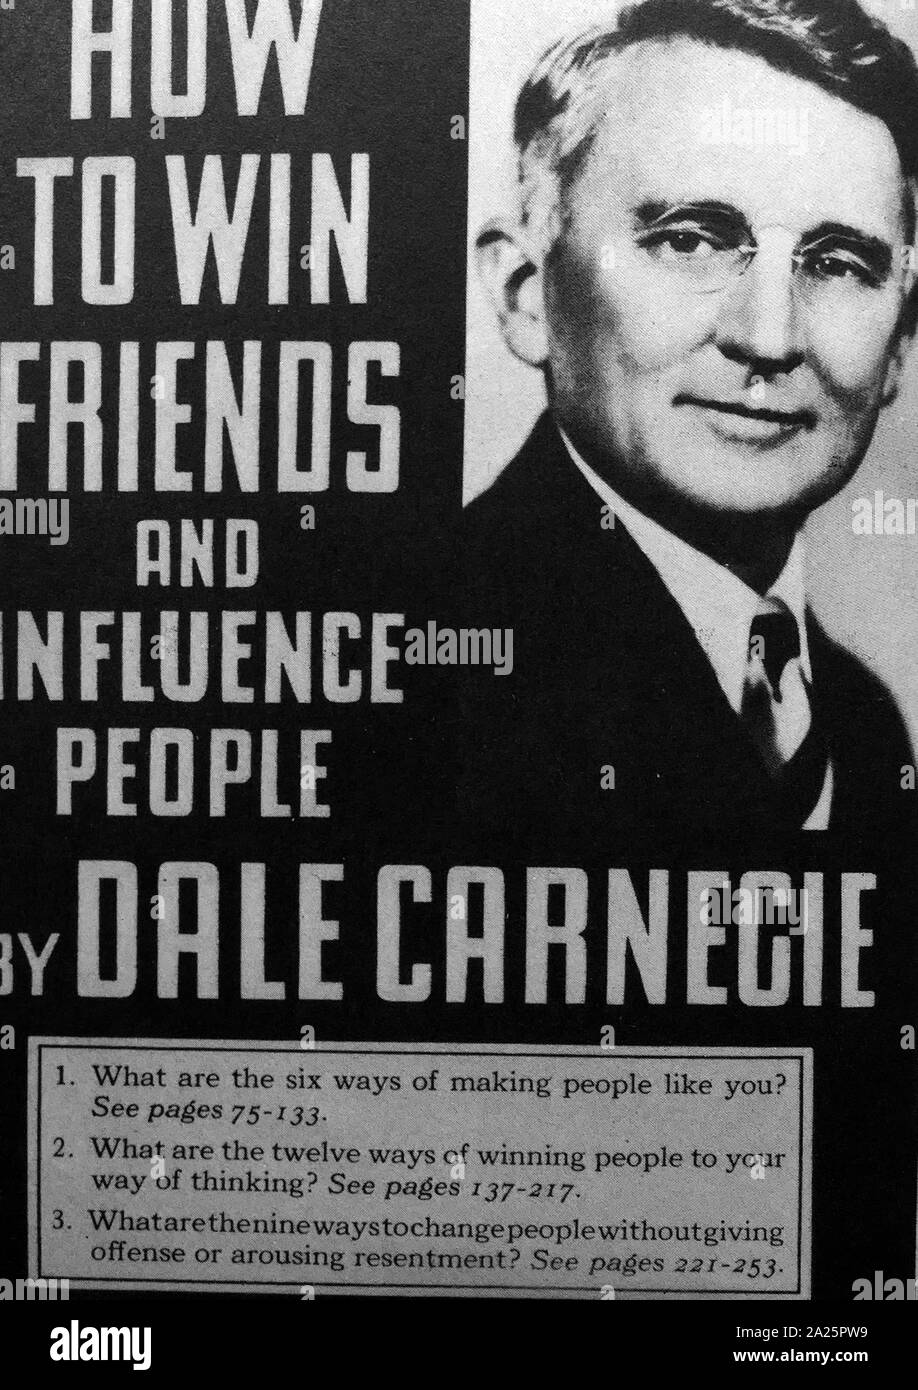 How to Win Friends and Influence People is a self-help book written by Dale Carnegie, published in 1936. Over 15 million copies have been sold worldwide, making it one of the best-selling books of all time. Stock Photo